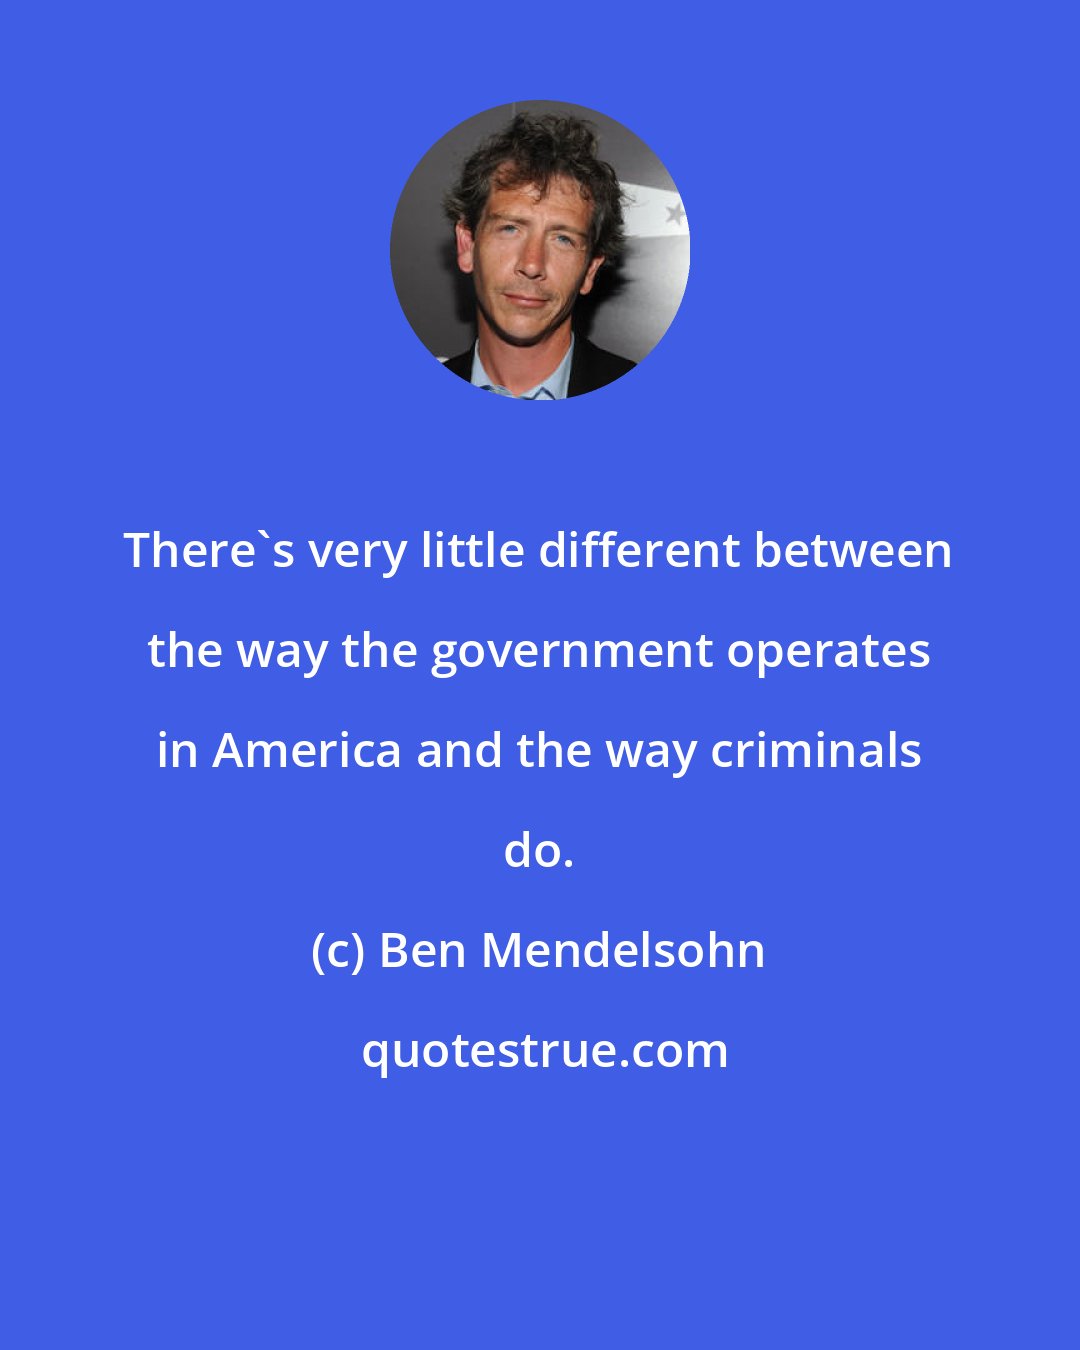 Ben Mendelsohn: There's very little different between the way the government operates in America and the way criminals do.